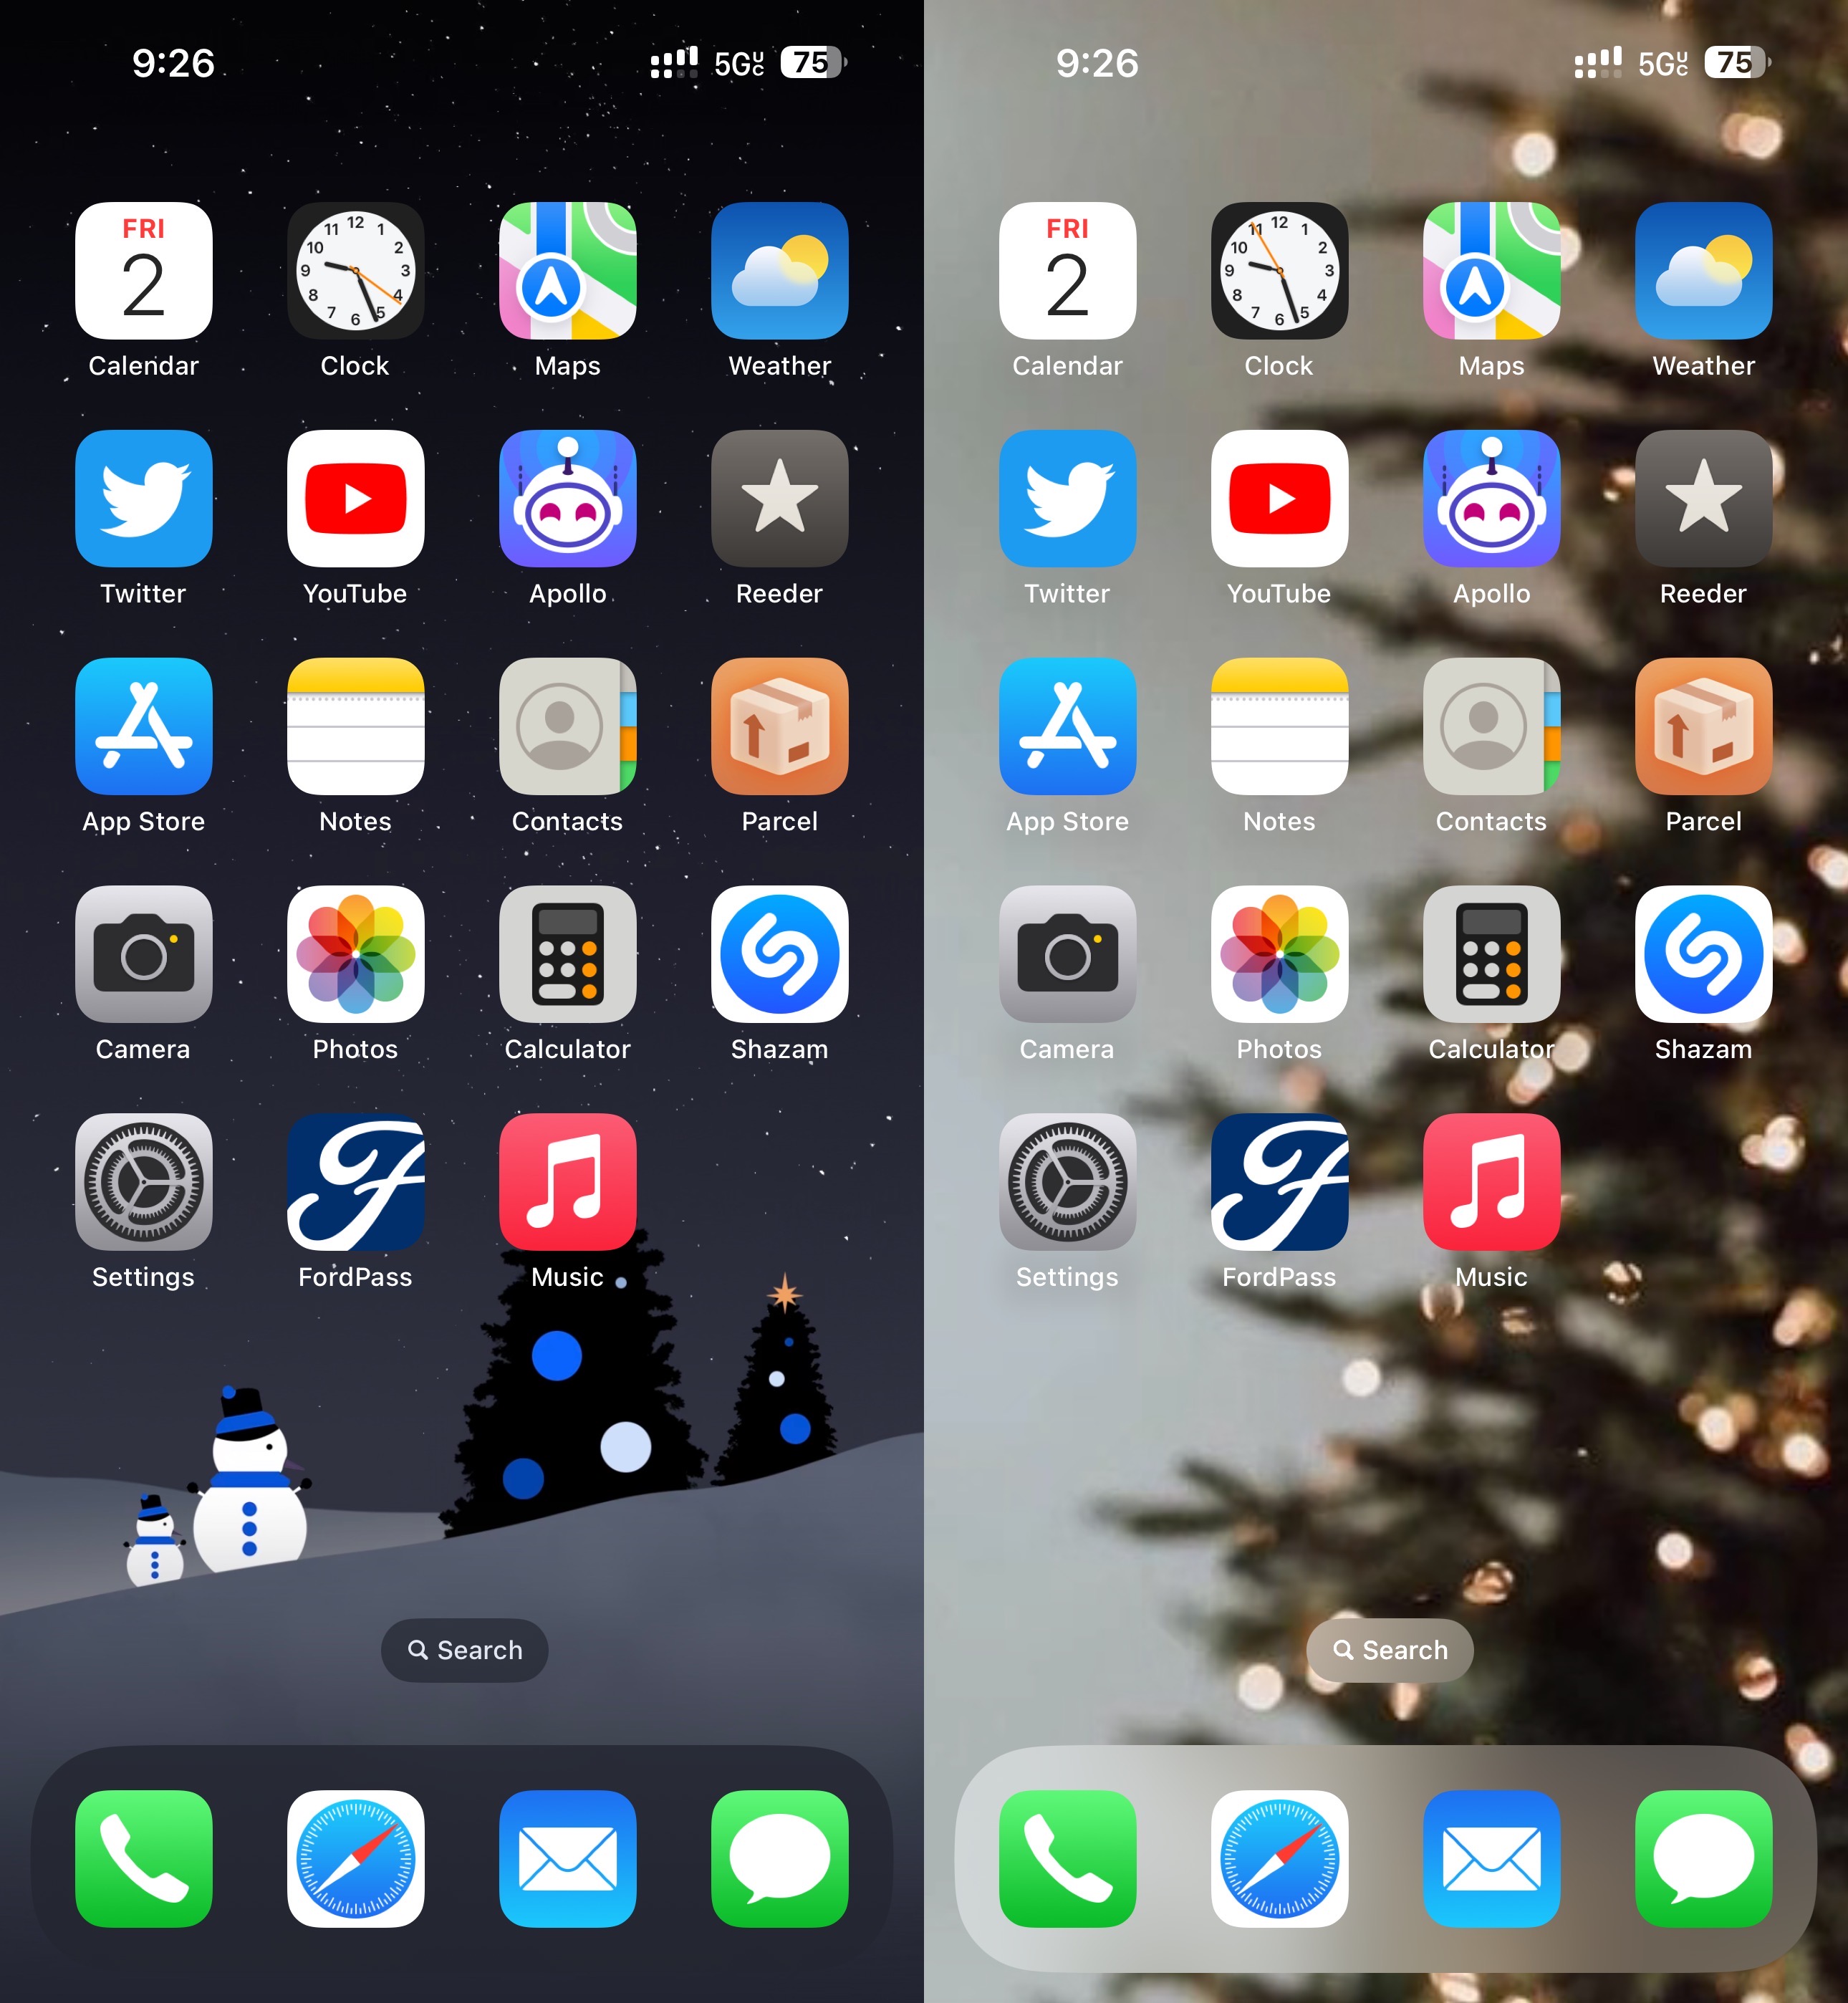 Holiday light and dark mode wallpapers for iPhone.